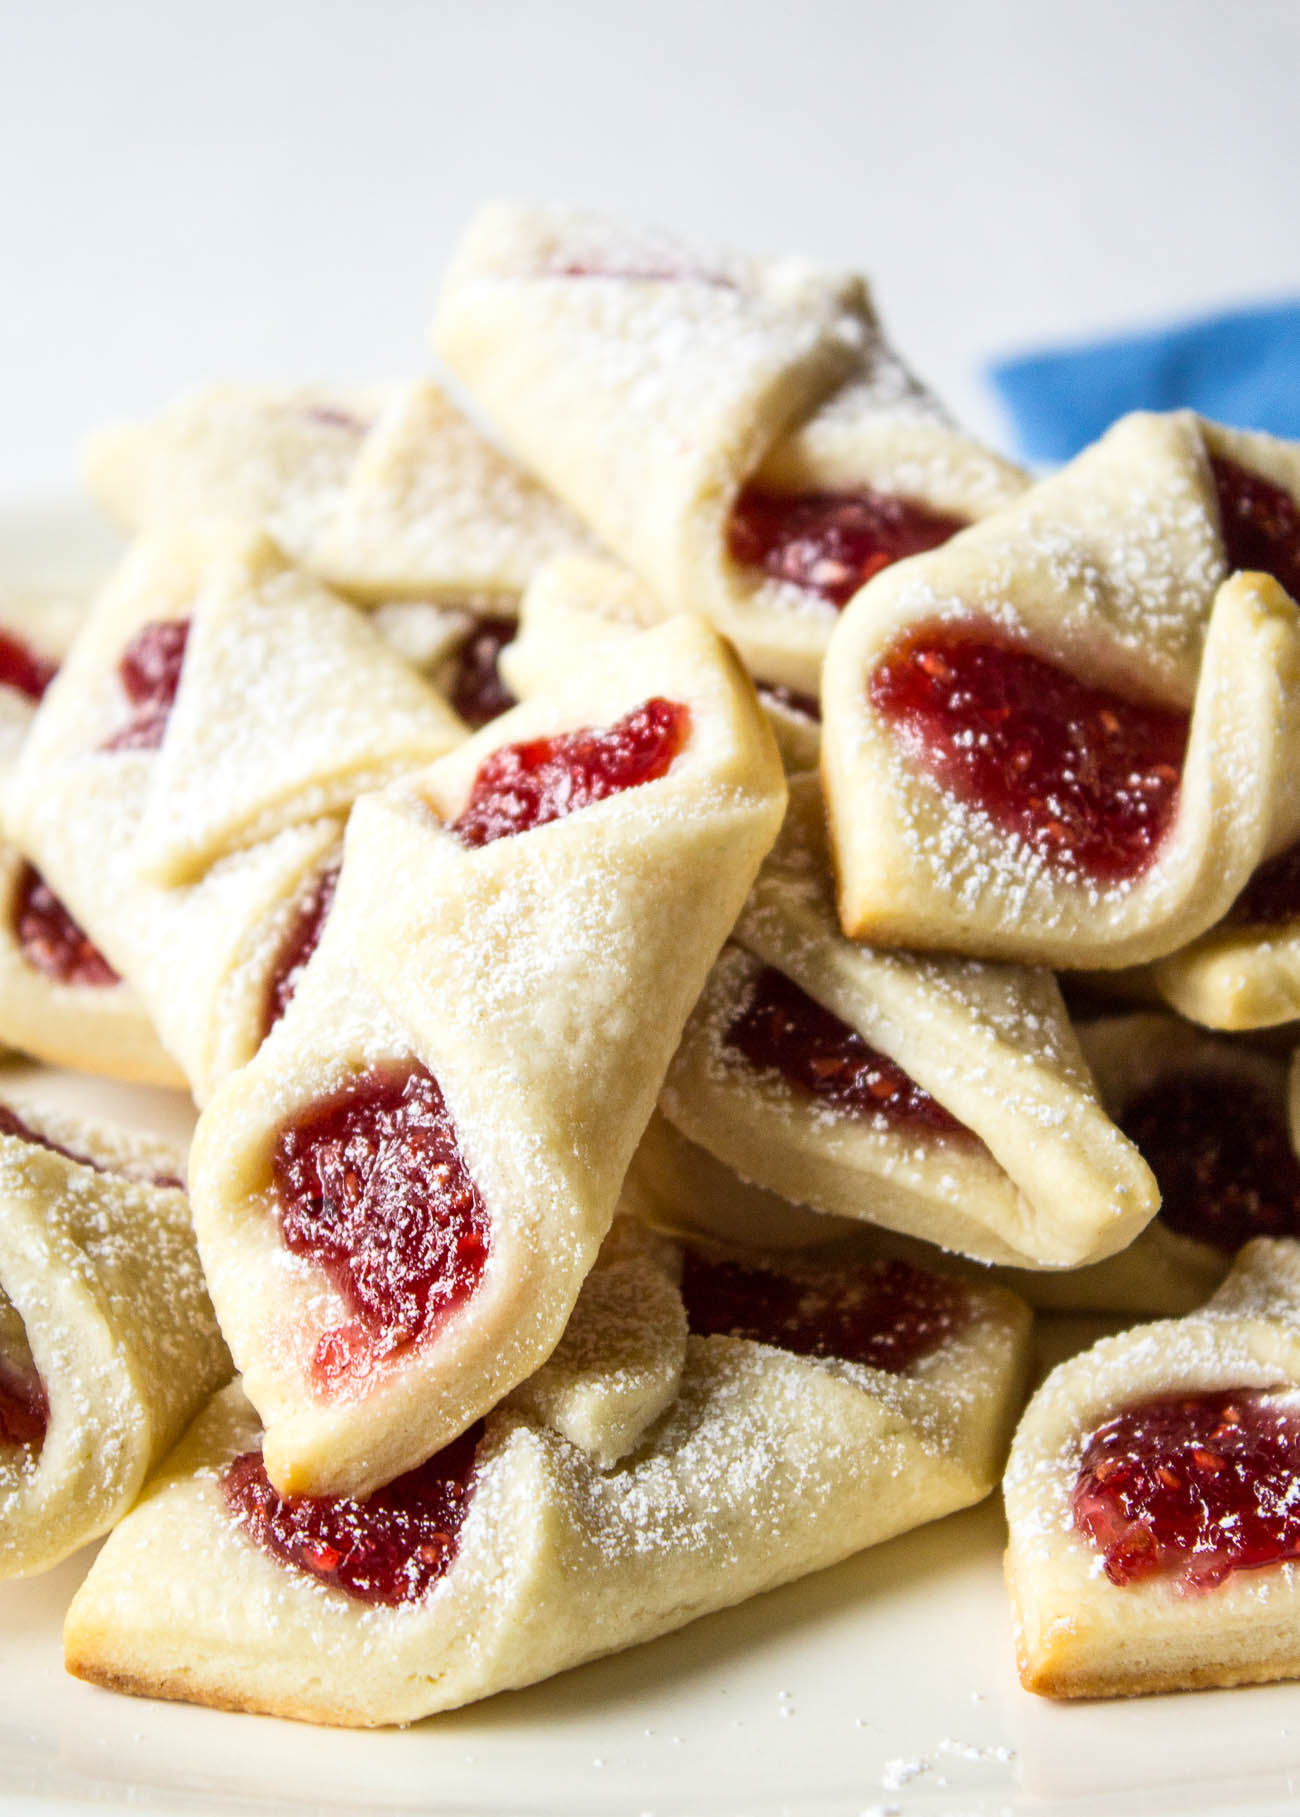 21 Christmas Cookie Recipes That Aren’t Chocolate Chip
